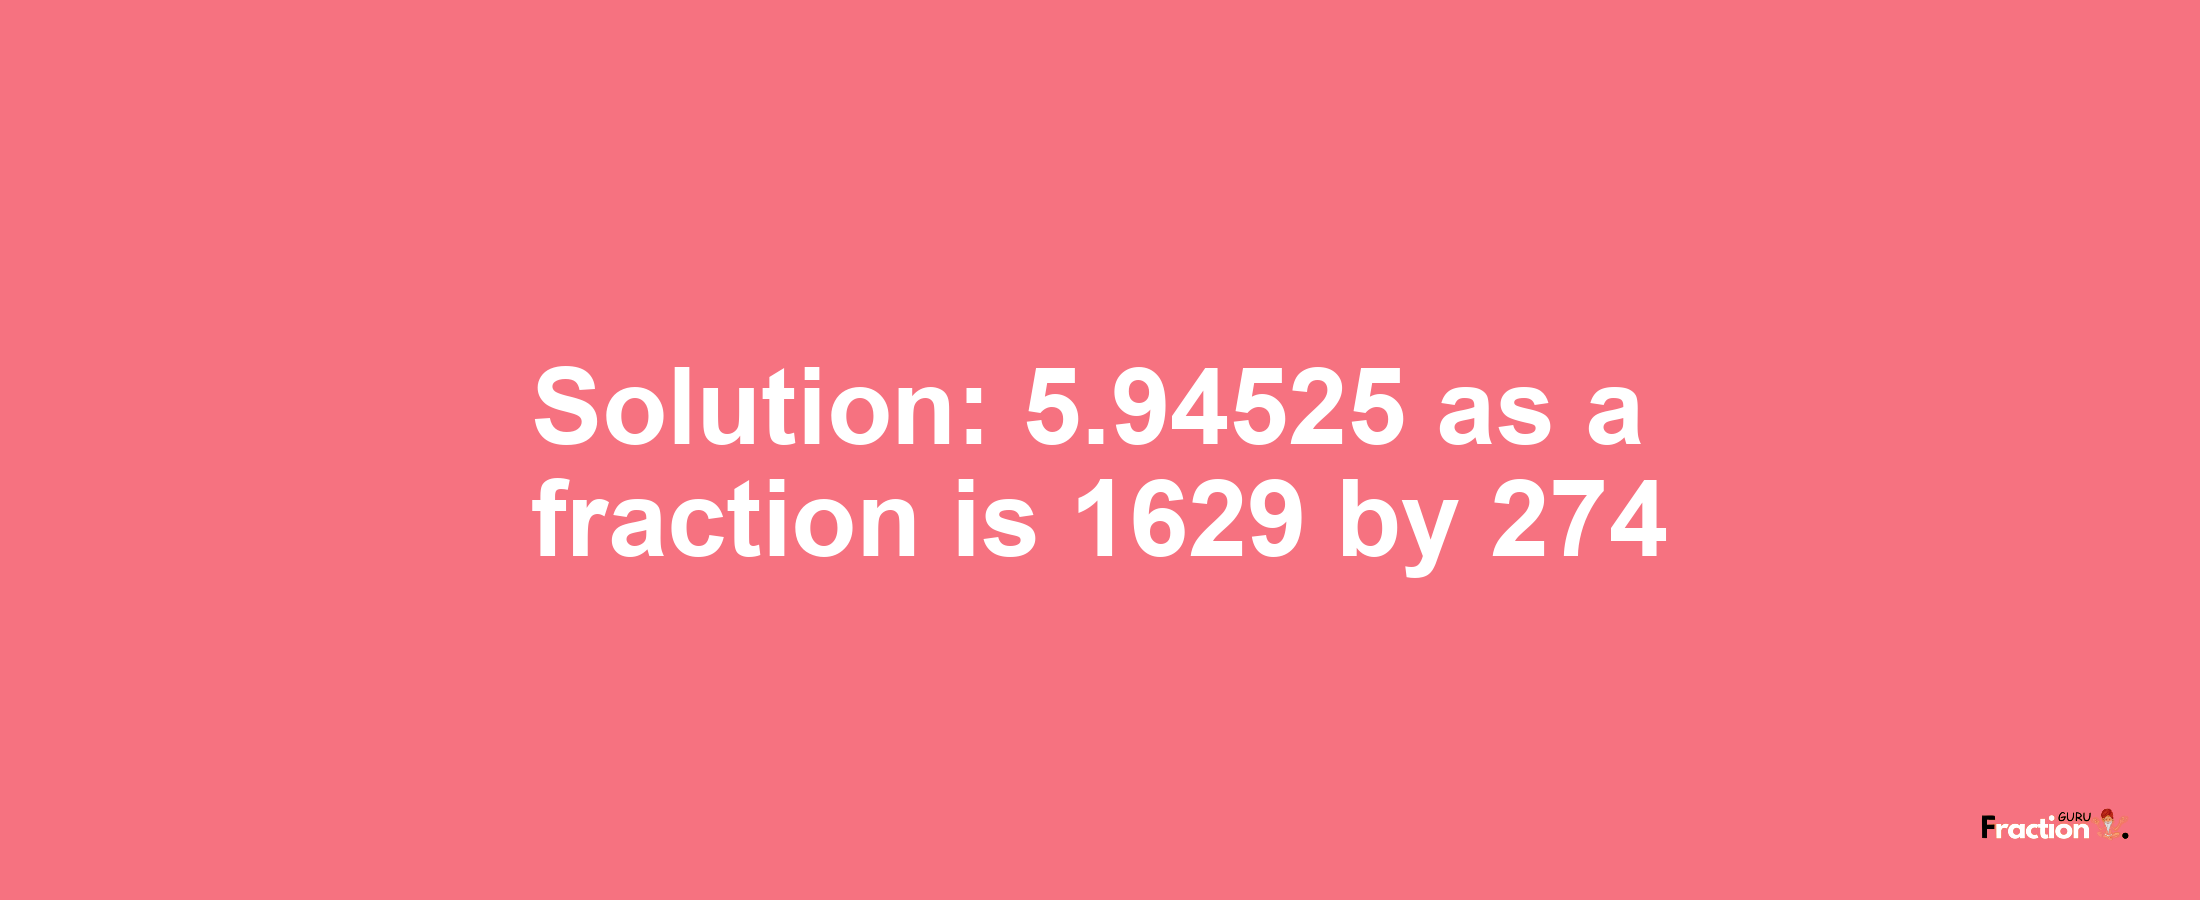 Solution:5.94525 as a fraction is 1629/274